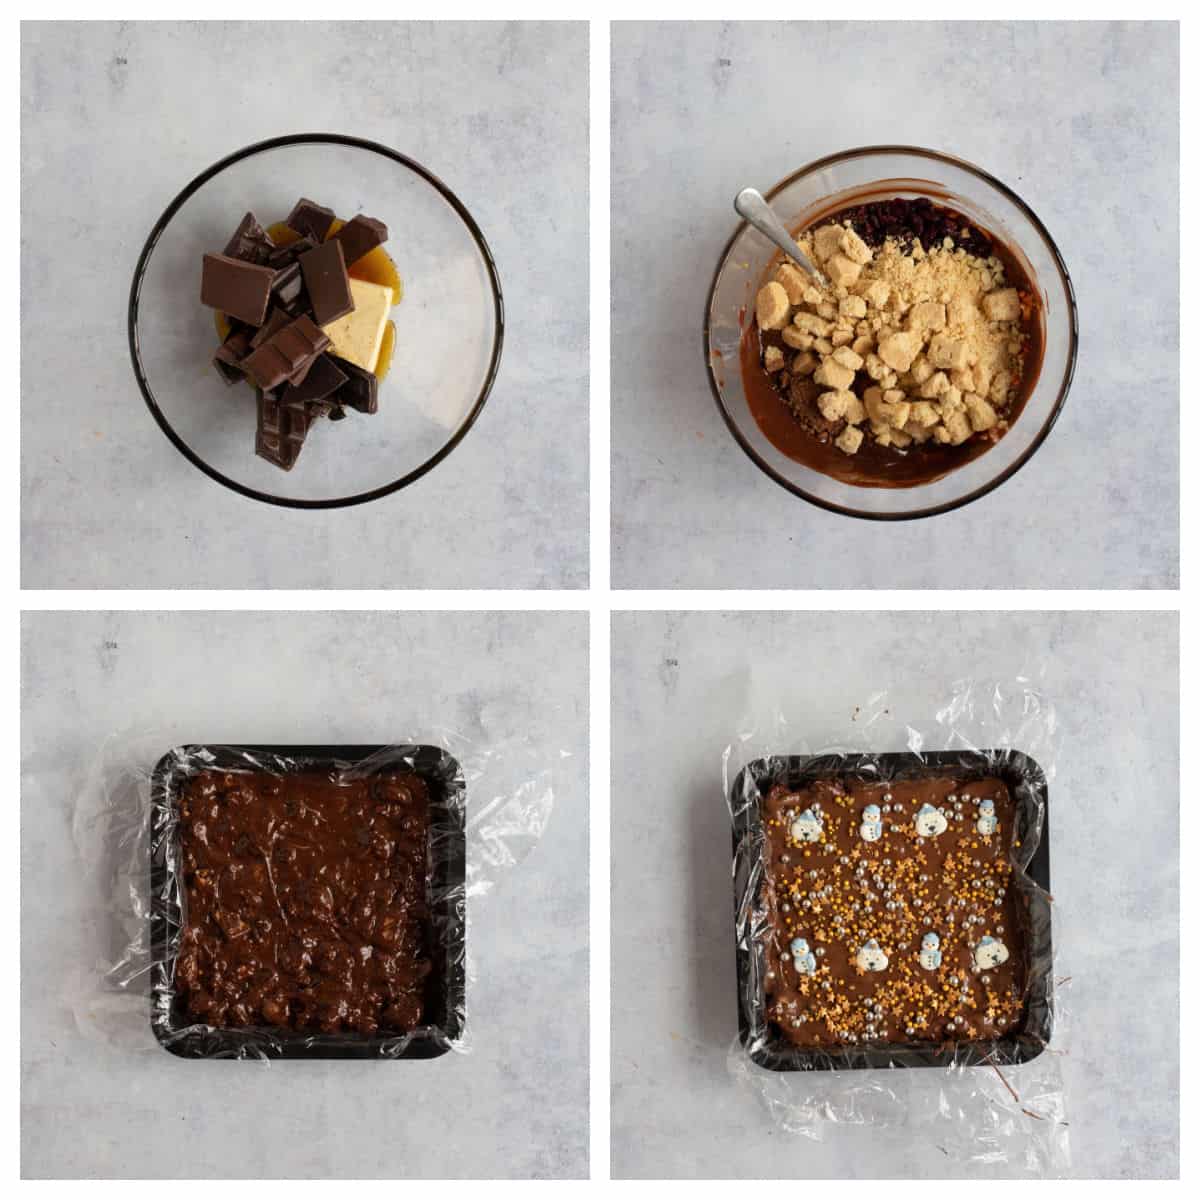 Making Christmas chocolate tiffin - step by step photo instructions.